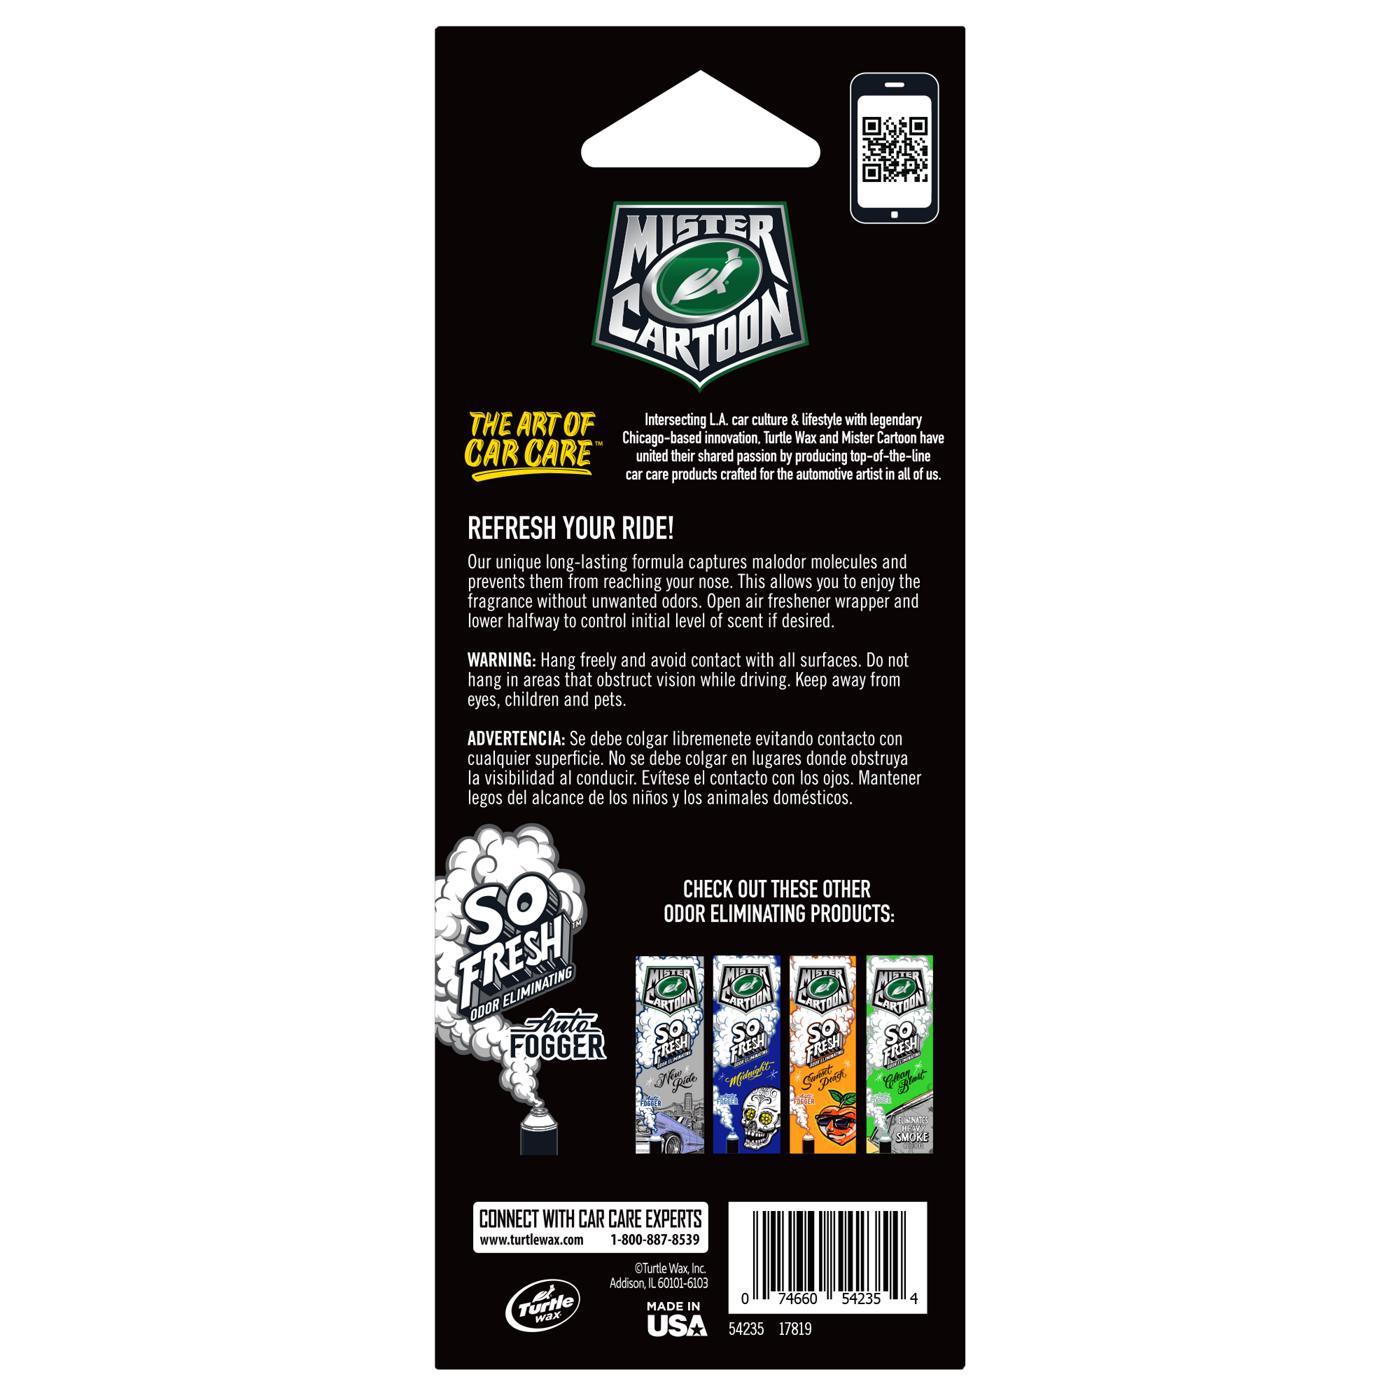 Turtle Wax Mister Cartoon Paper Air Fresheners - Mr. Low Lo; image 2 of 2